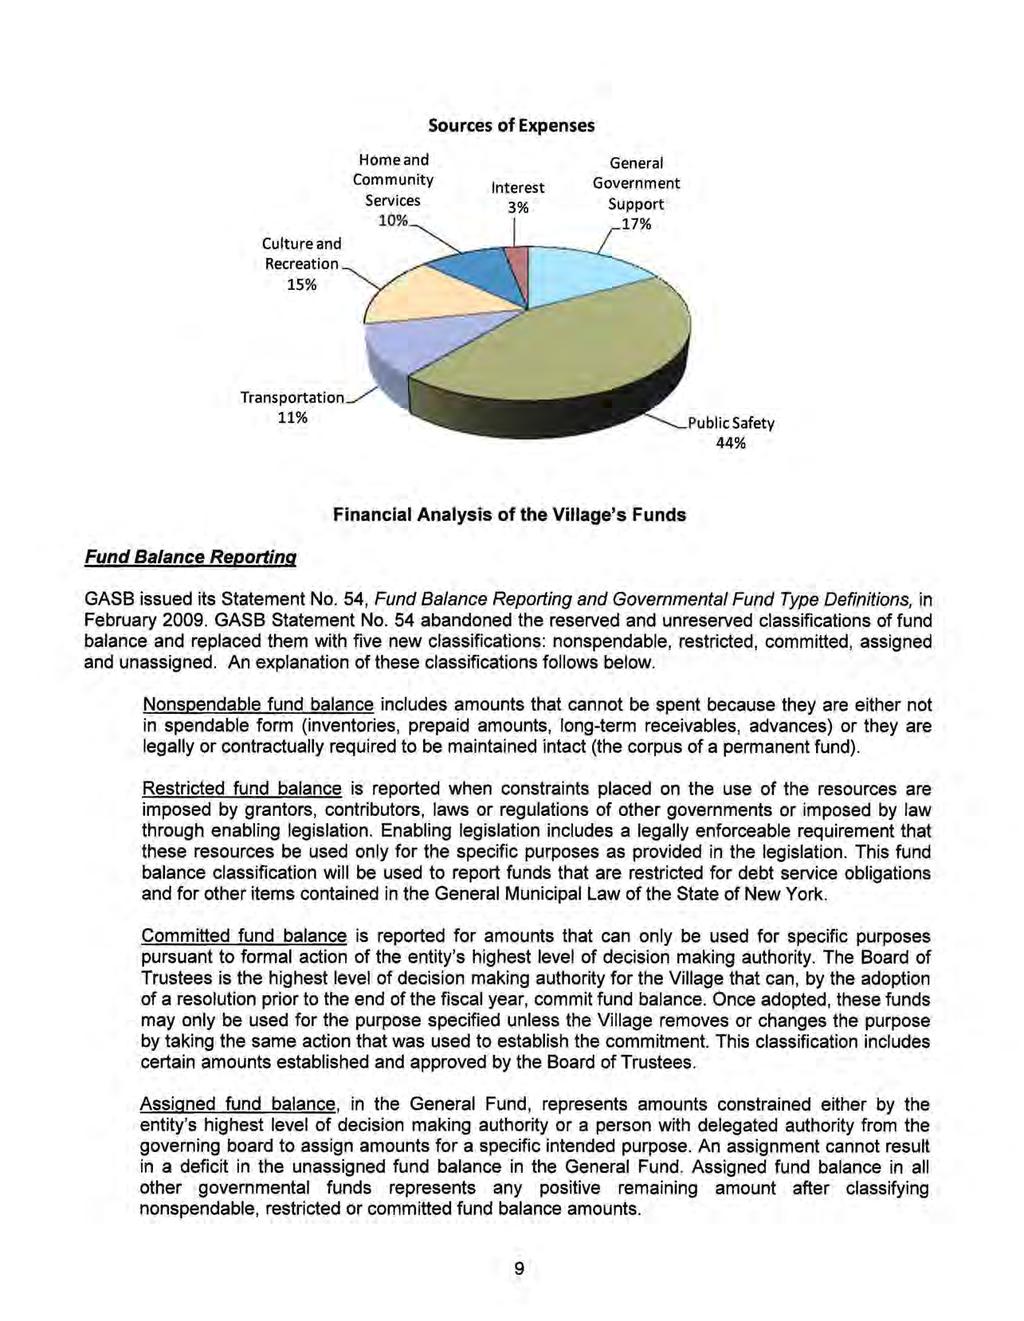 Sources of Expenses Culture and Recreation 15% Home and Community Services Interest 3% General Government Support 7% Transportation 11% blicsafety 44% Financial Analysis of the Village's Funds Fund